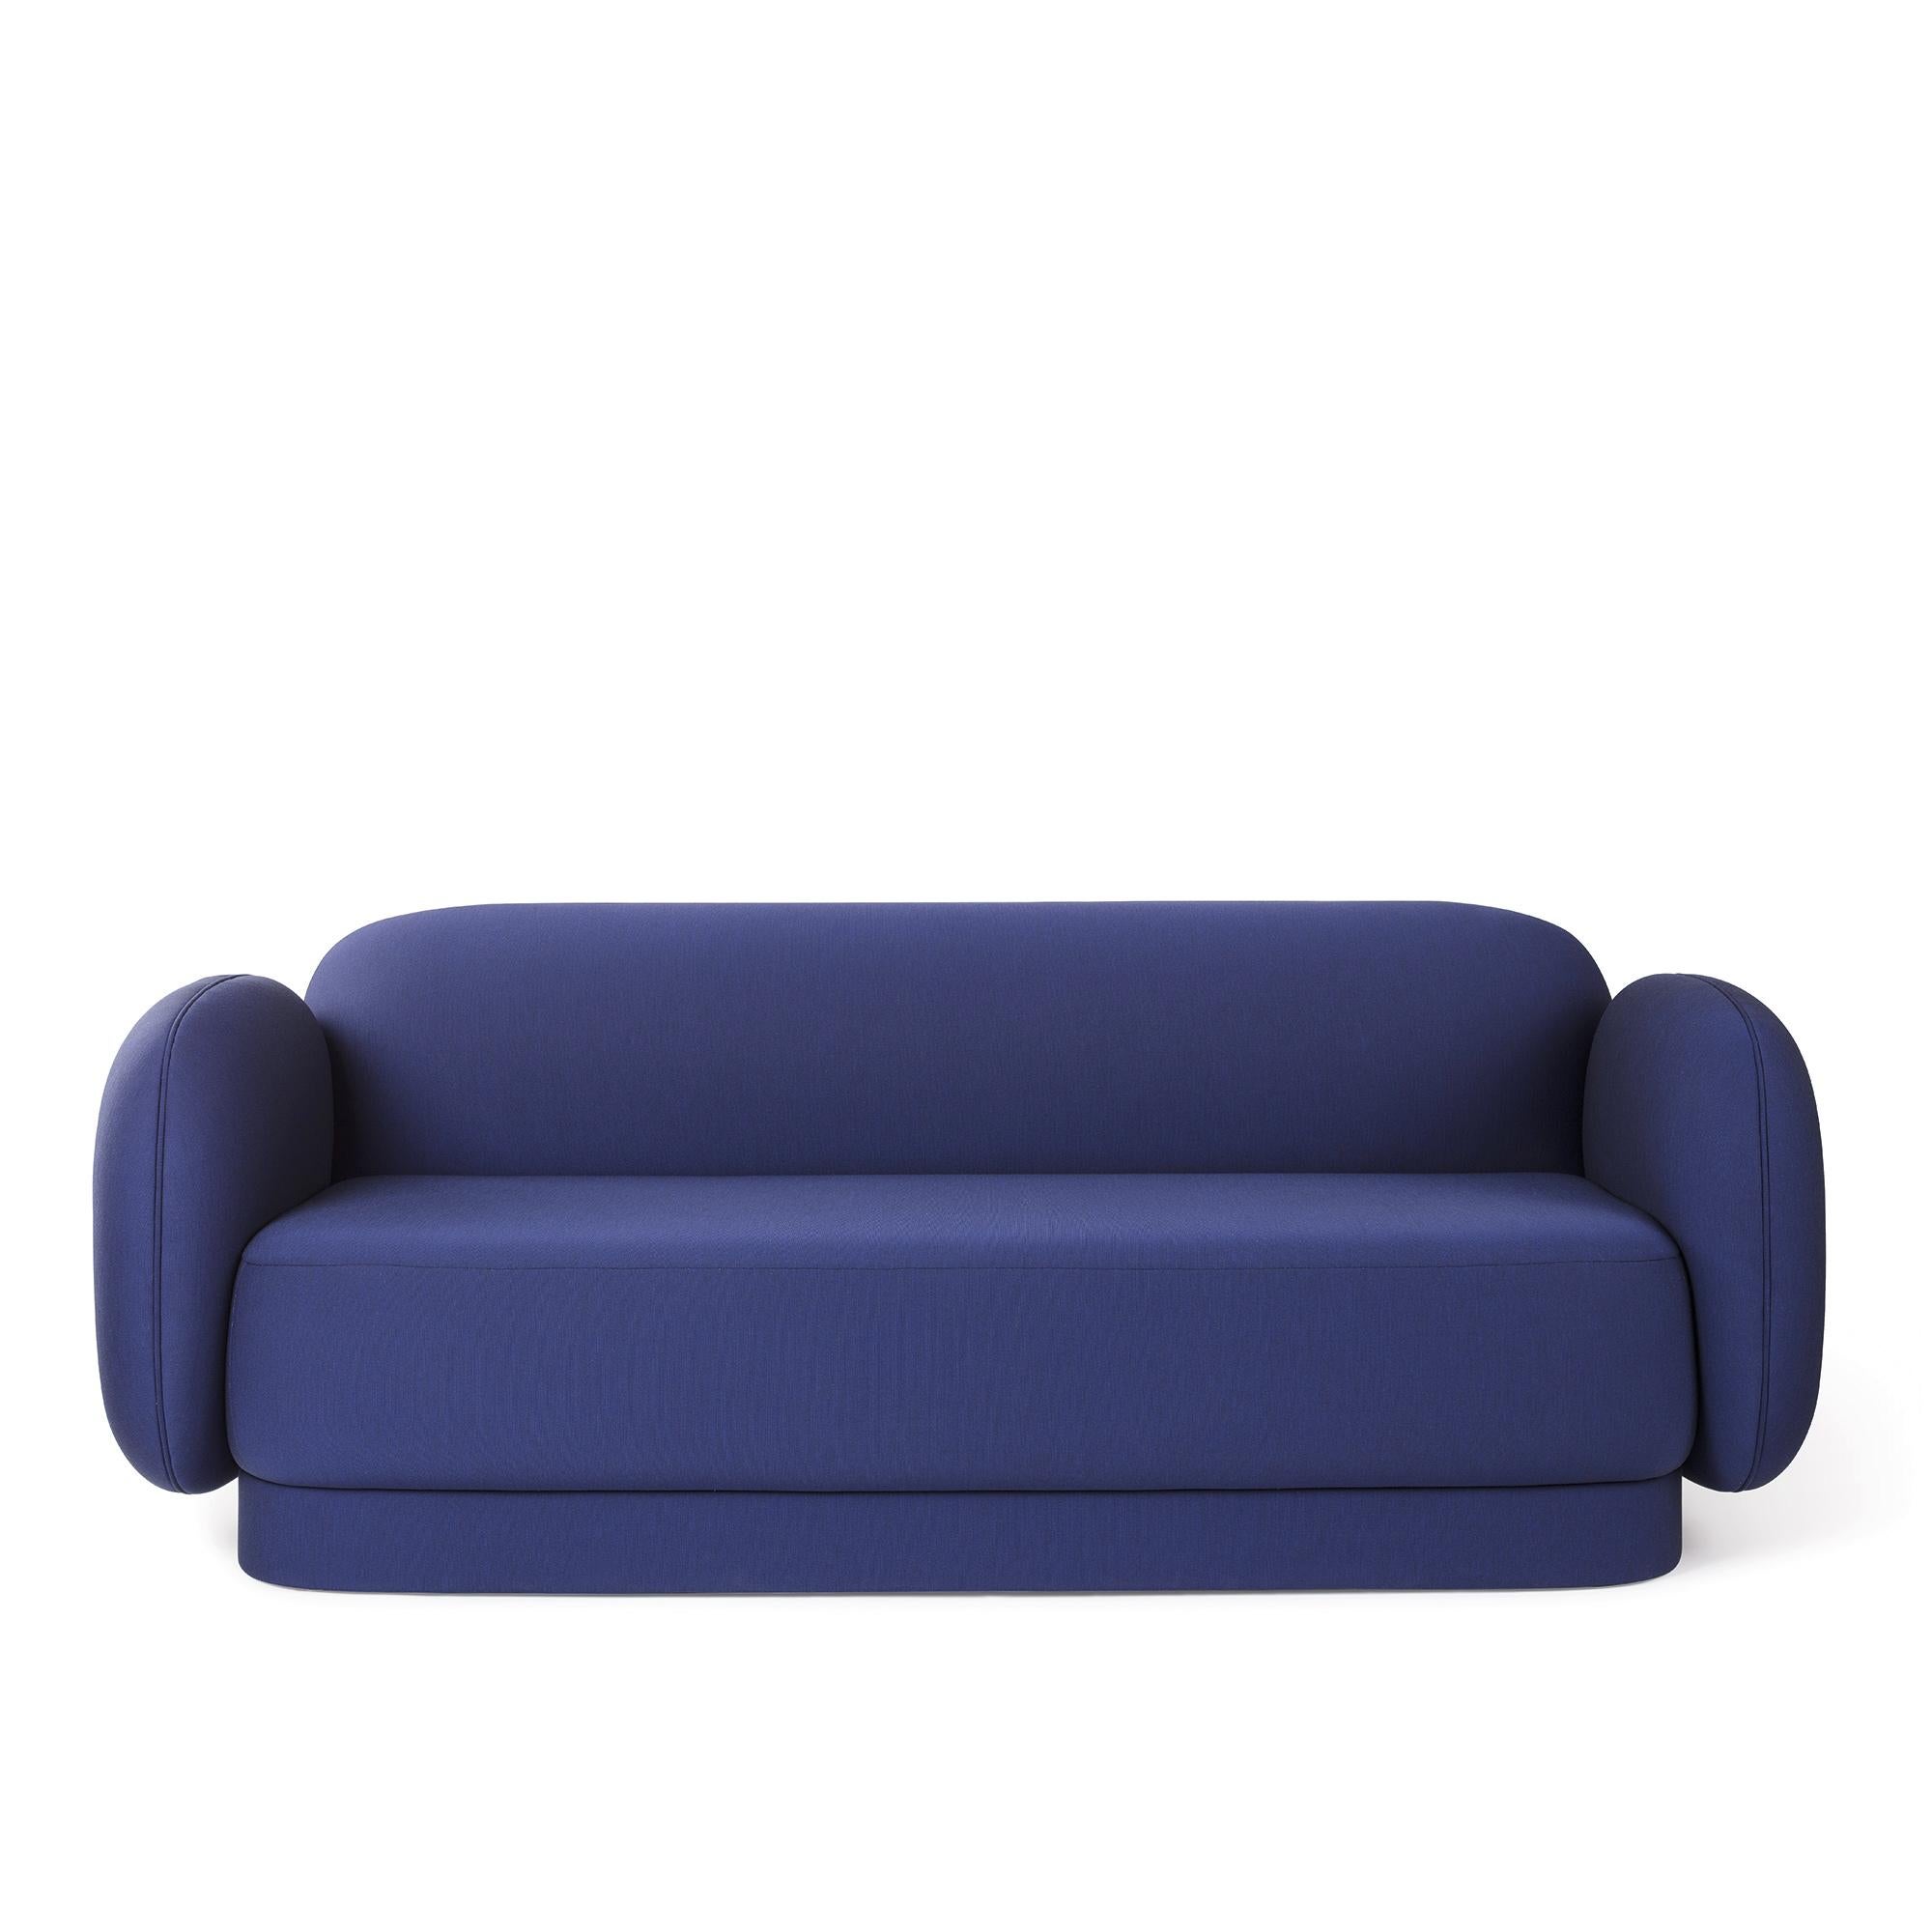 Three seater major tom sofa designed by Thomas Dariel
Dimensions: D 90 x W 240 x H 89 cm
Materials: Structure in solid timber and plywood. Memory foam base and seating fully upholstered in fabric.
Available in finishes: kvadrat premium